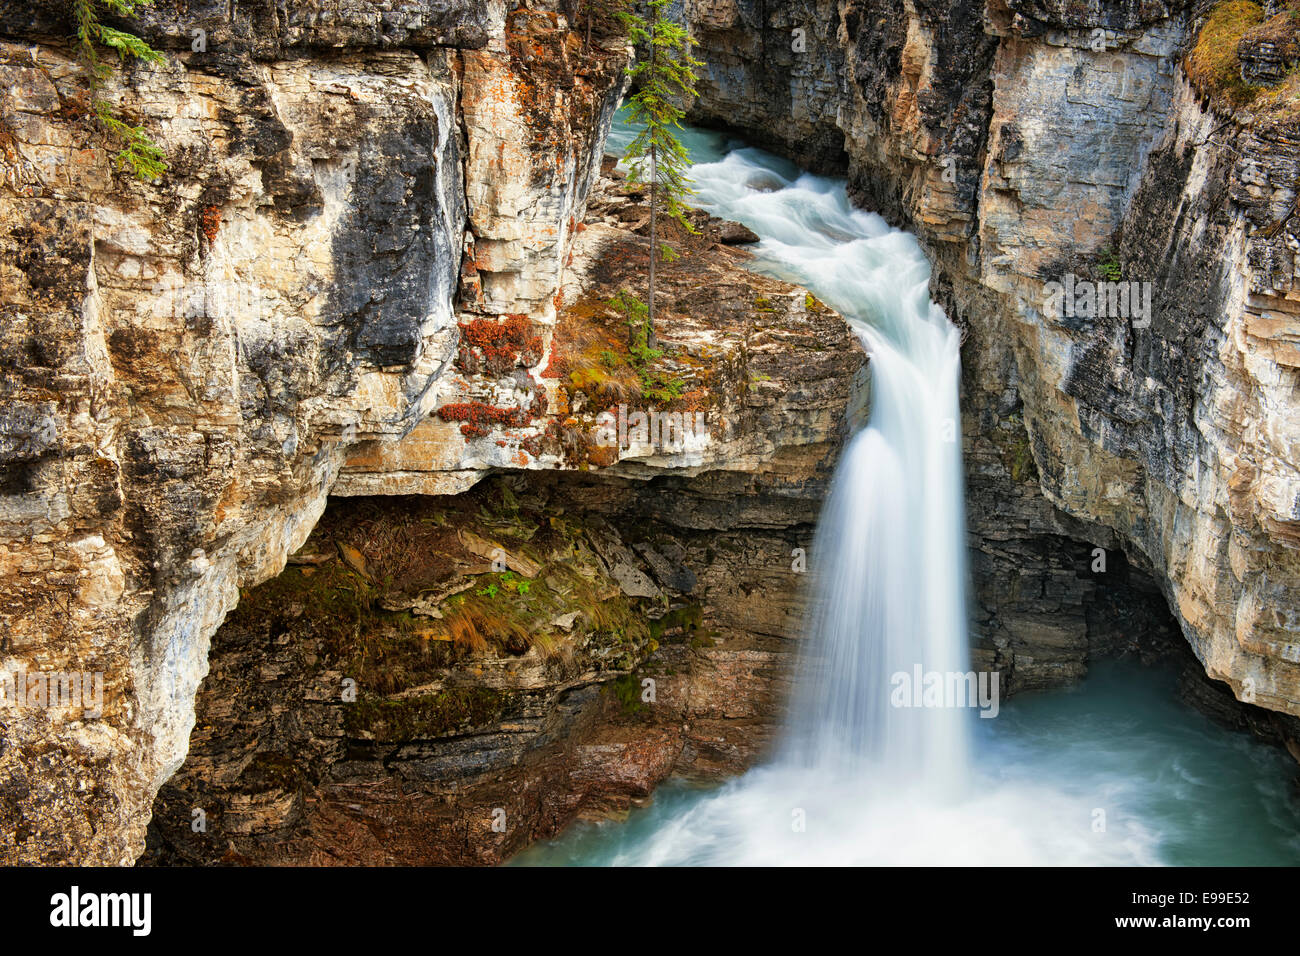 Beauty Creek pours over one of the many unnamed waterfalls in Alberta's Canadian Rockies and Jasper National Park. Stock Photo